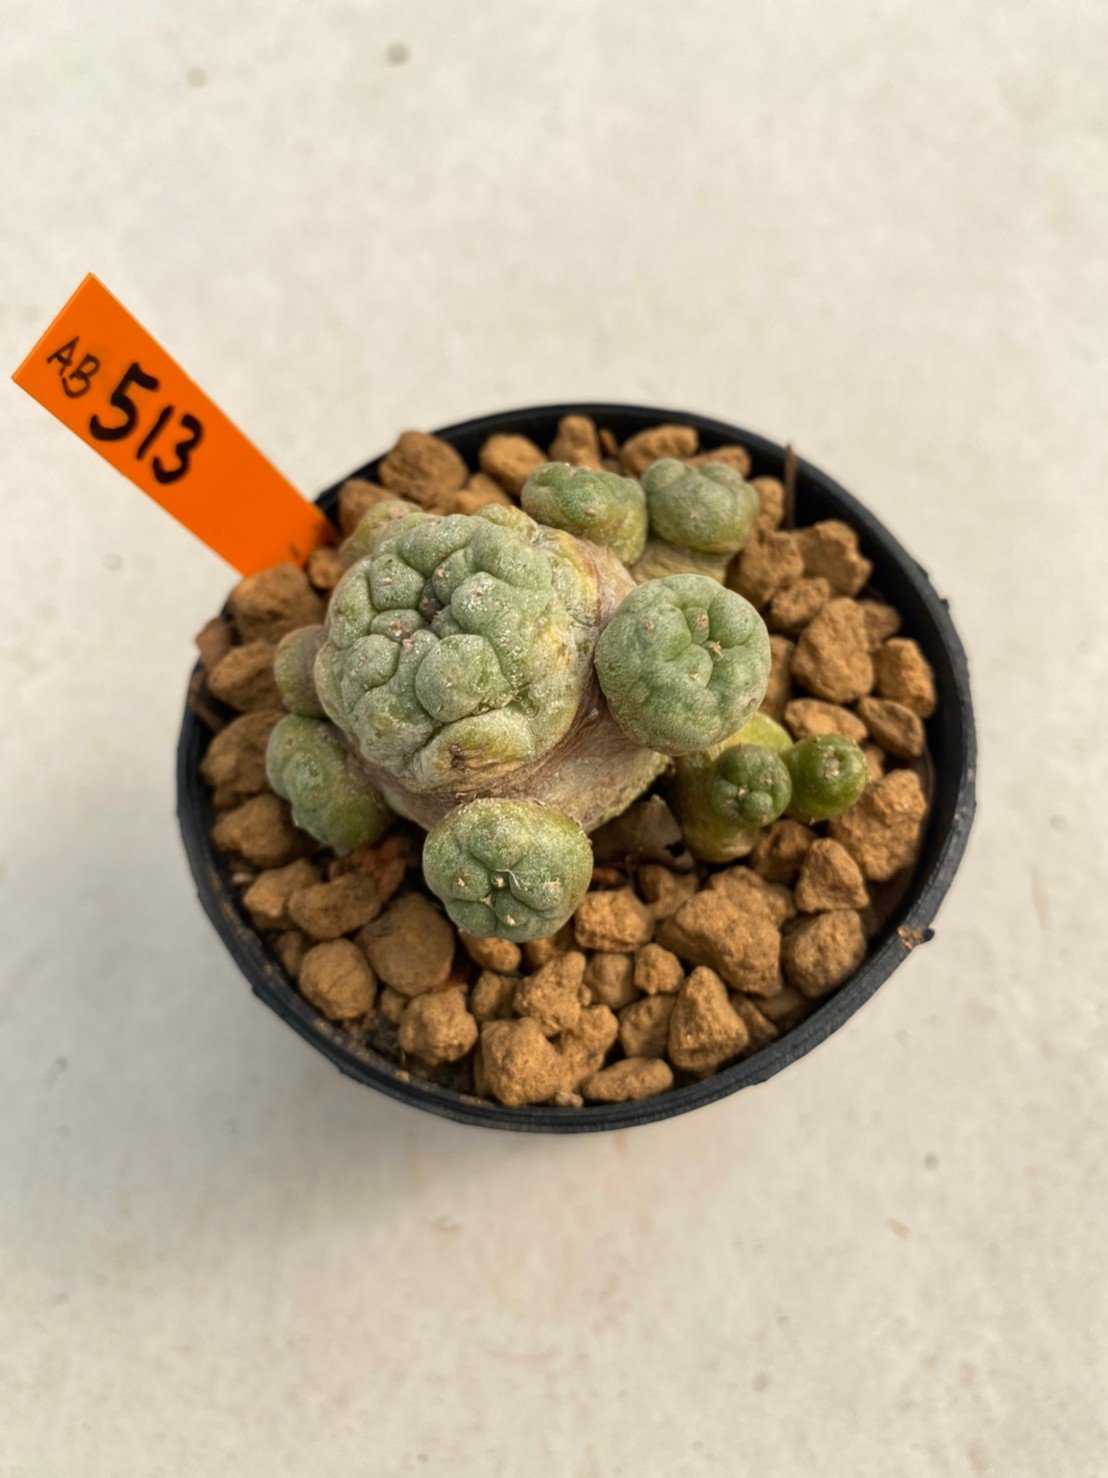 Lophophora Fricii 4-5 cm 12 years old ownroot from seed flowering